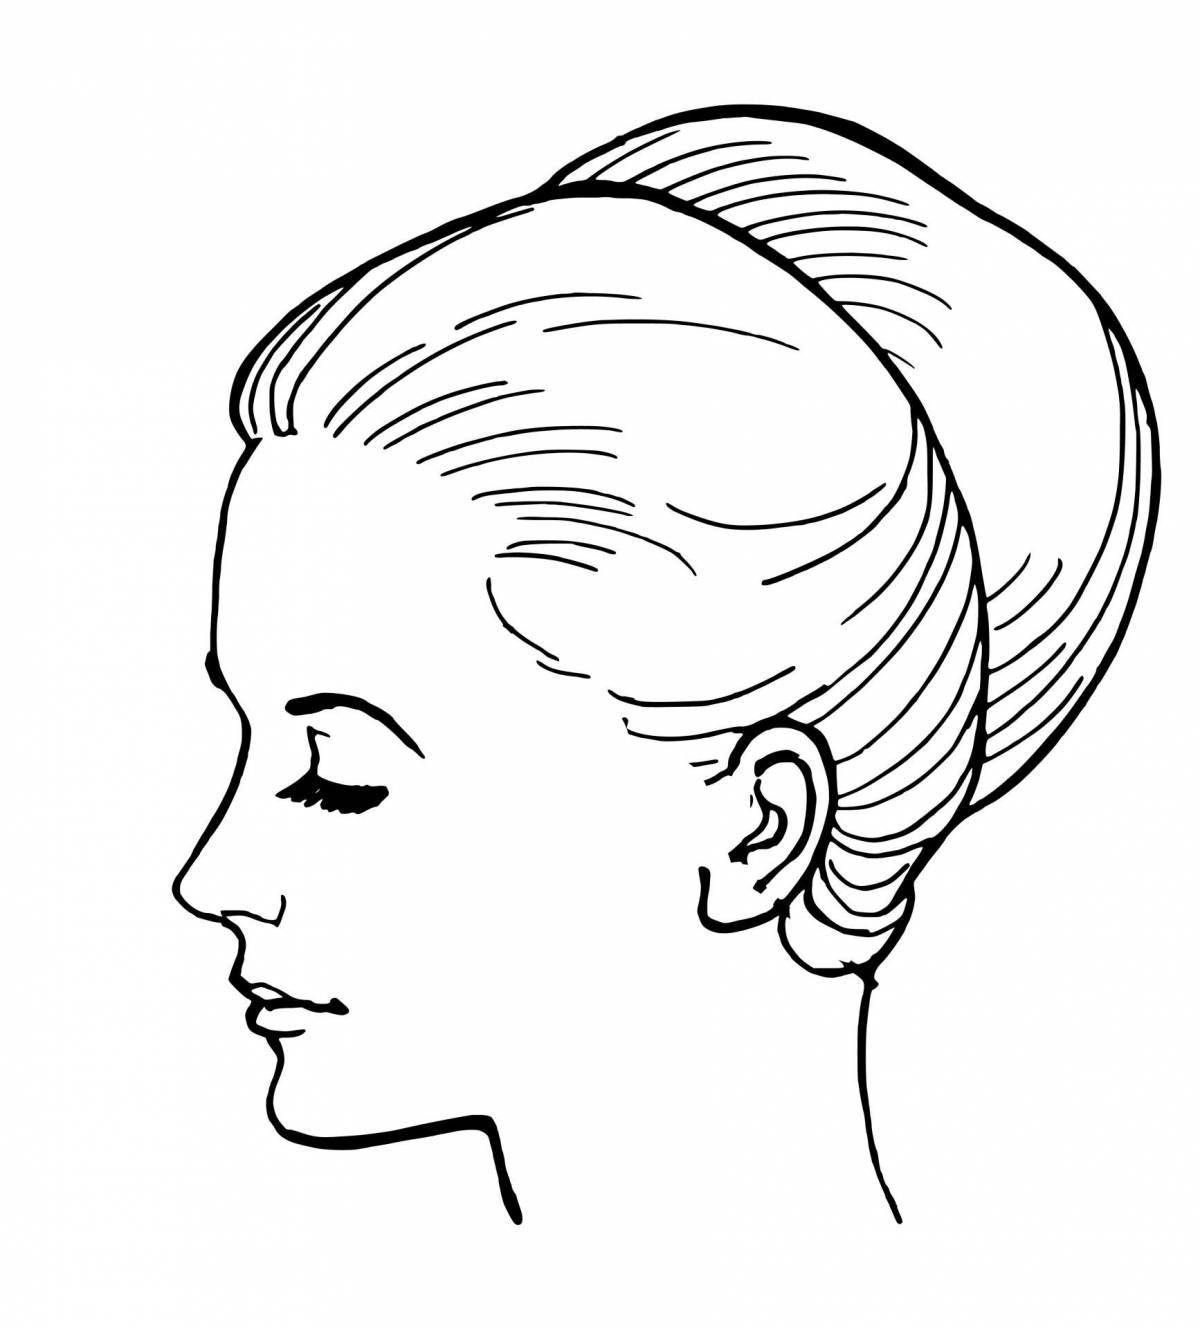 Awesome woman face coloring page for kids